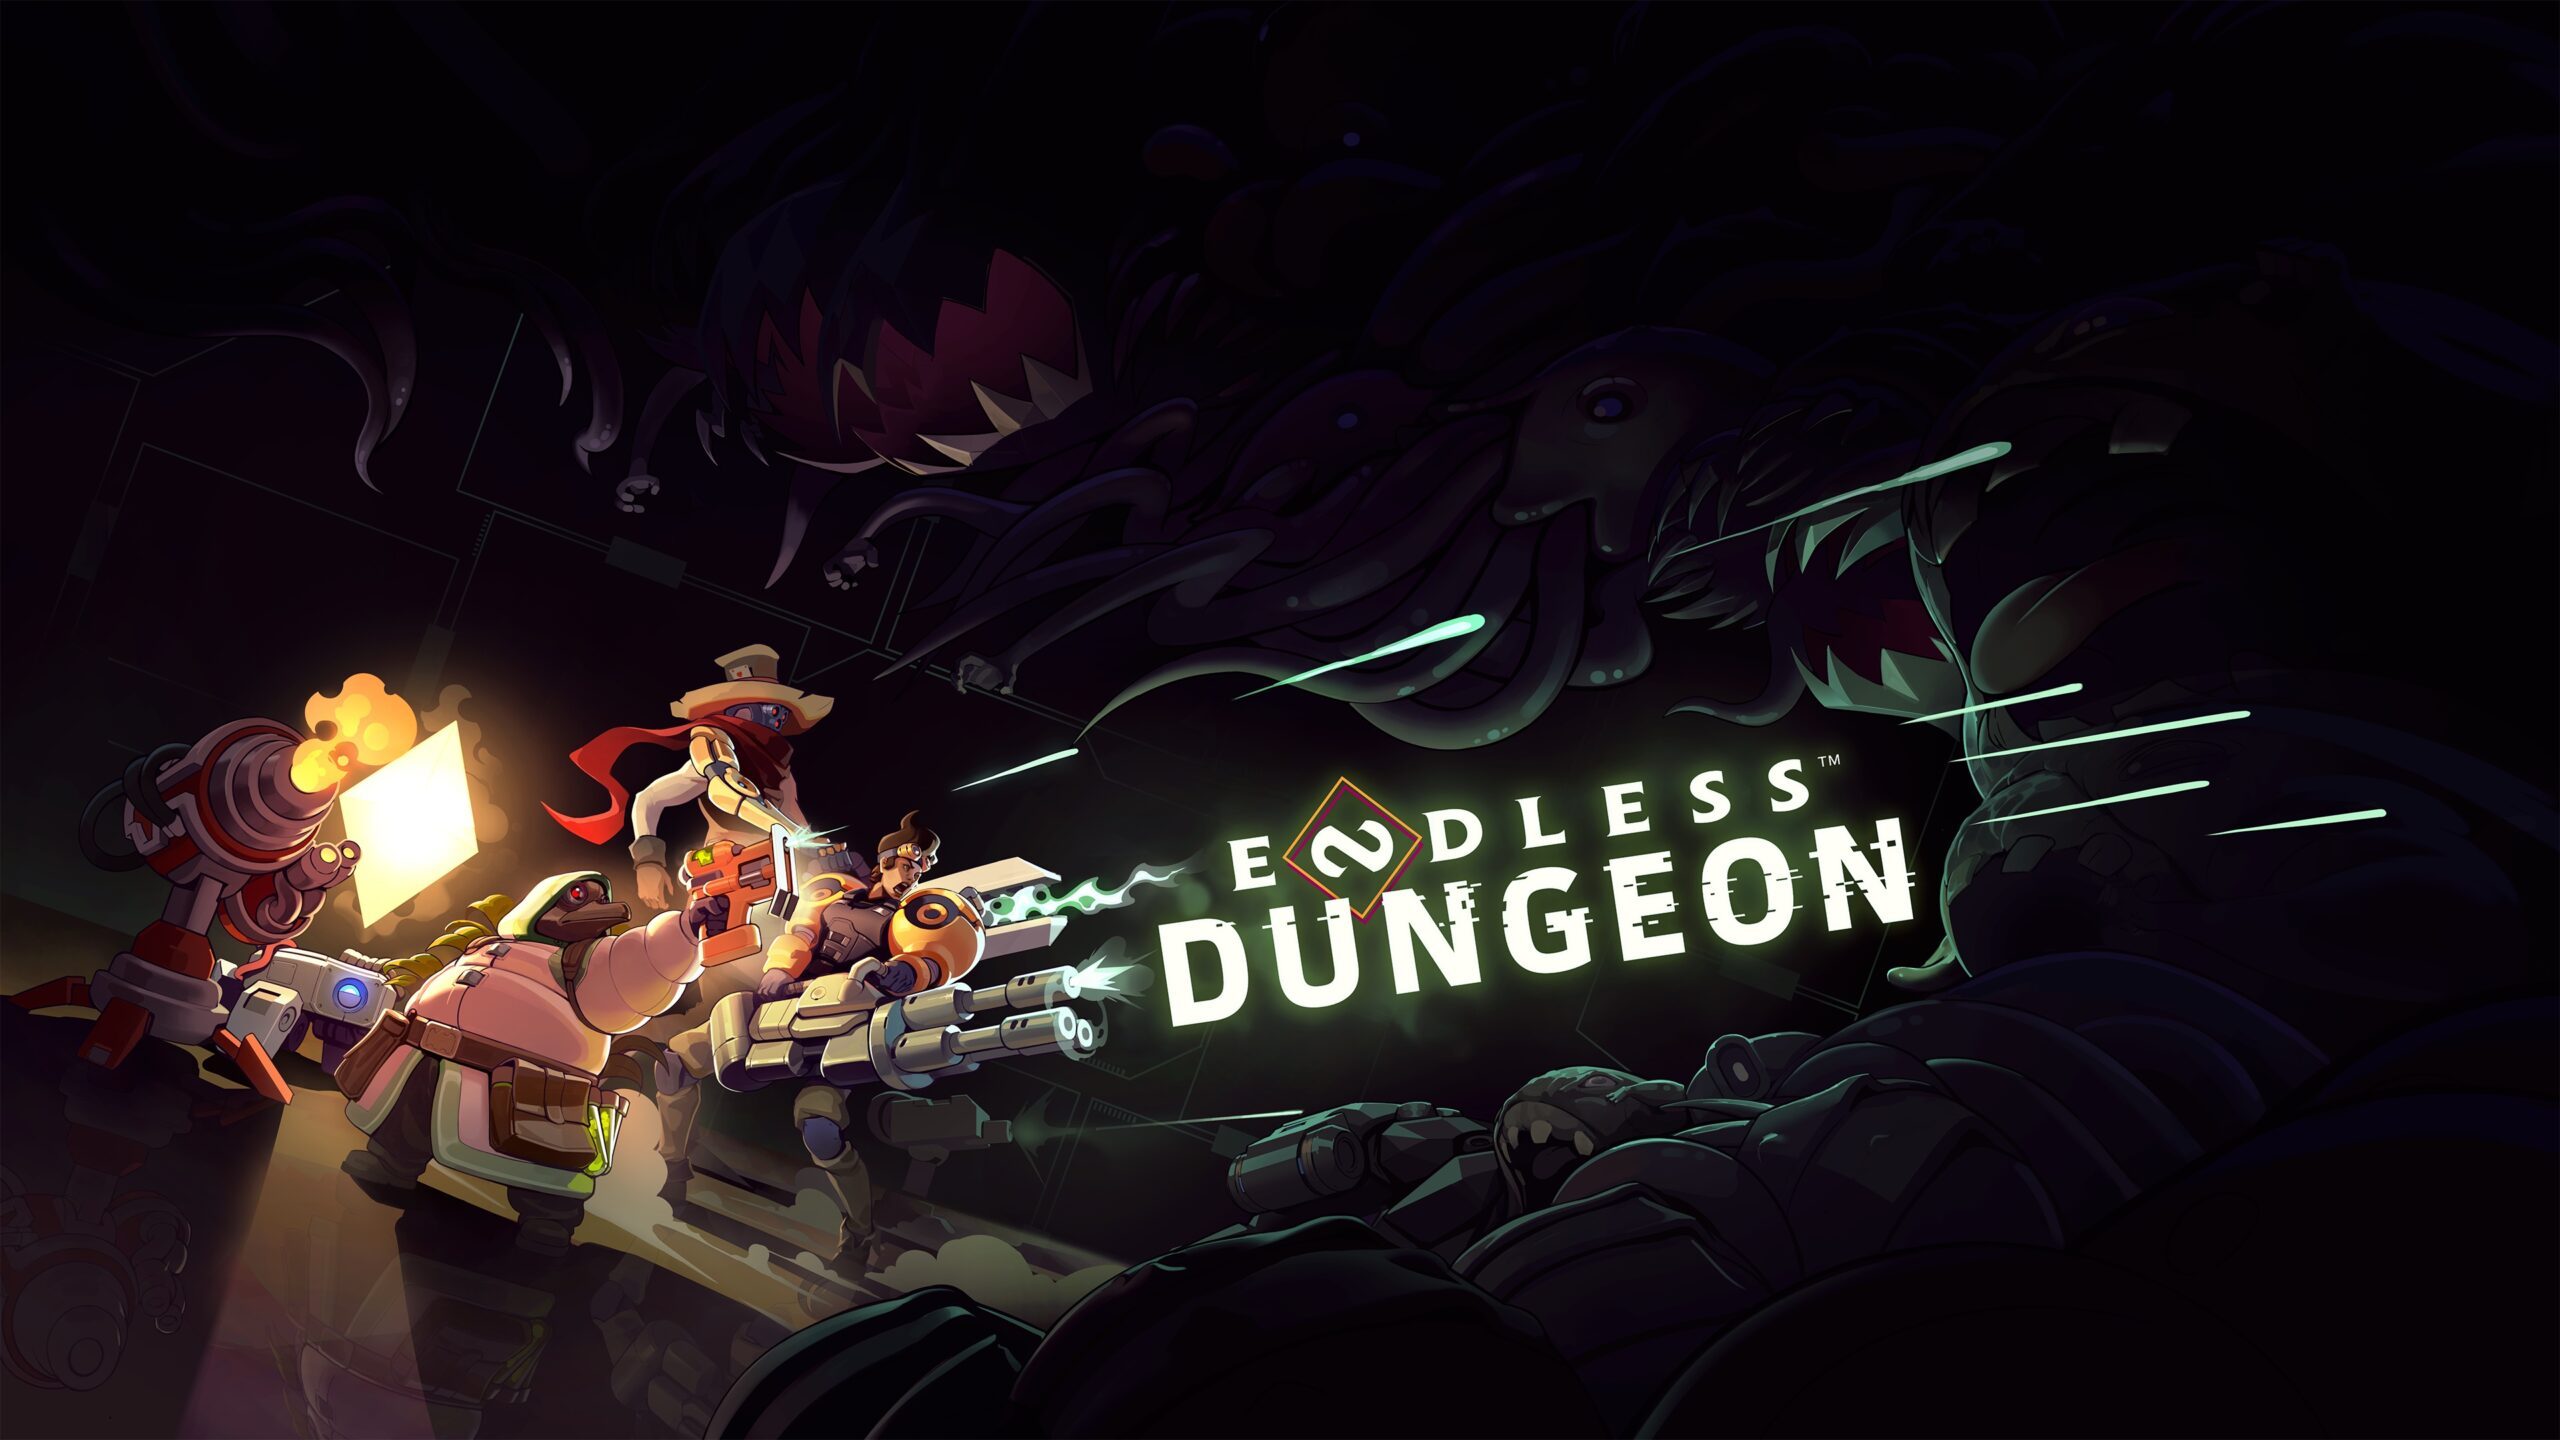 Amplitude Studios blends genres to create the action-packed Endless Dungeon